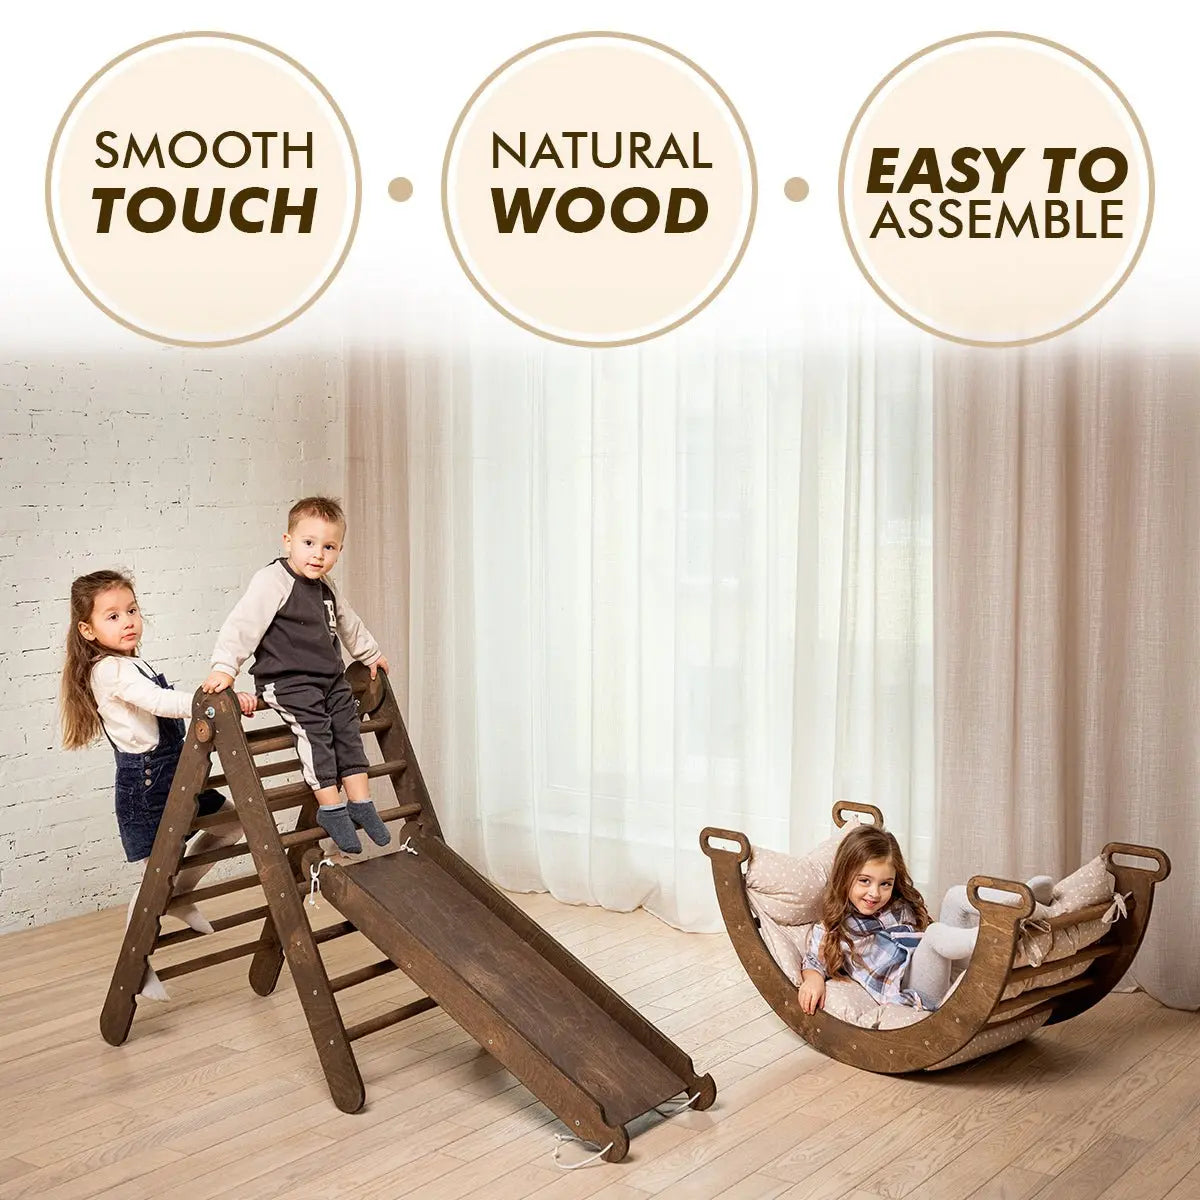 3in1 Montessori PlaySet for Toddlers: Arch + Slide + Cushion - Chocolate